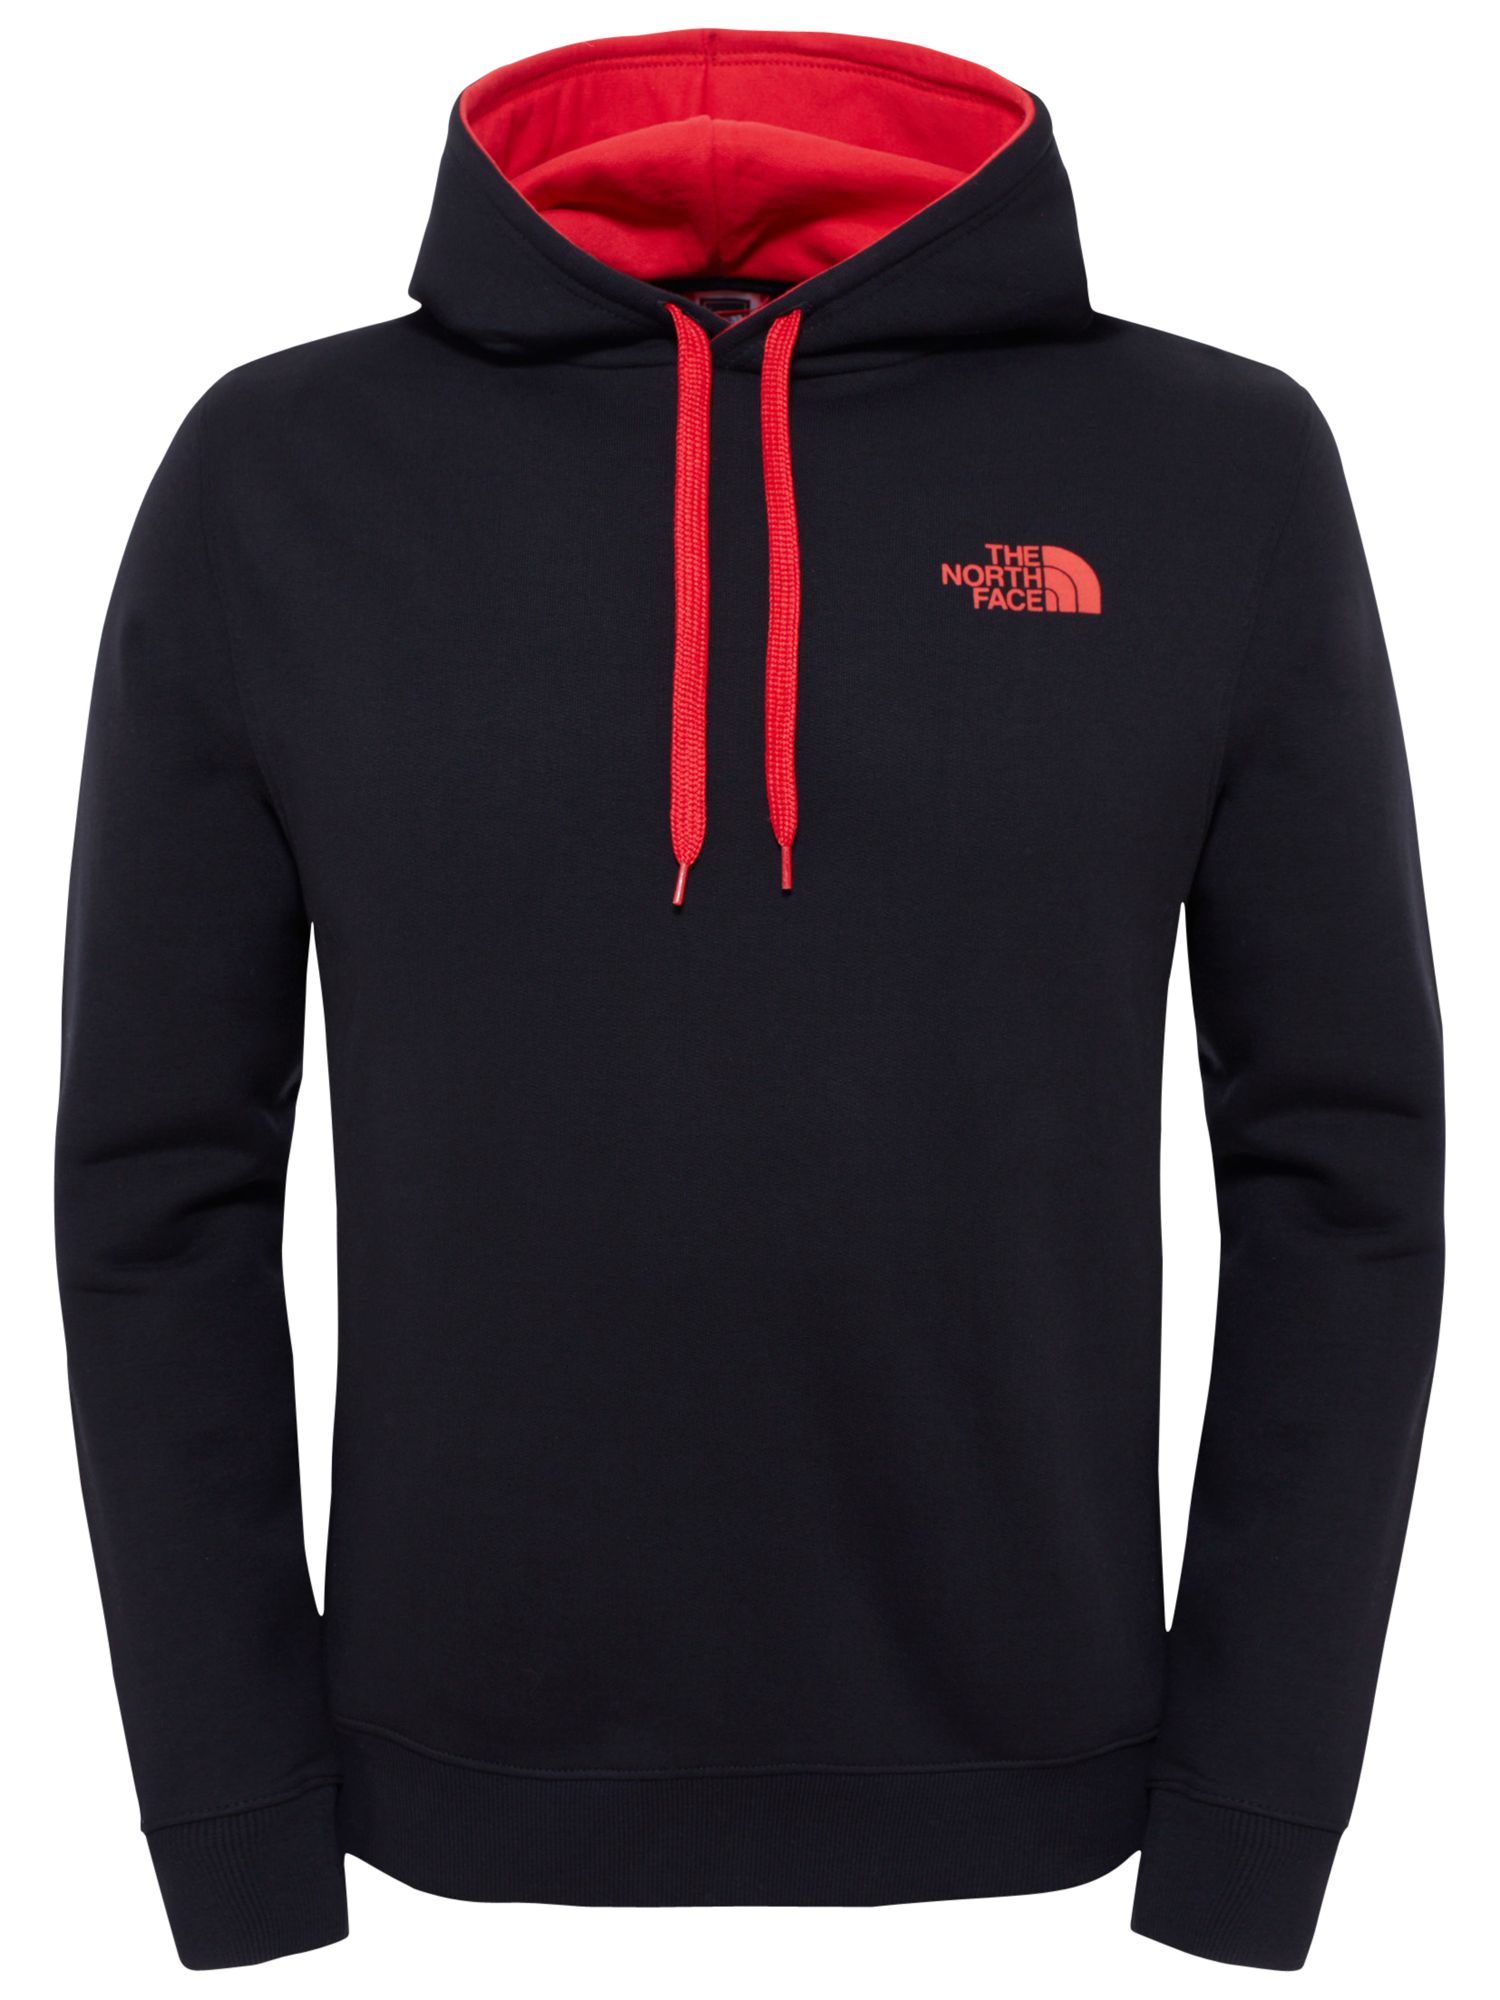 north face hoodie red and black